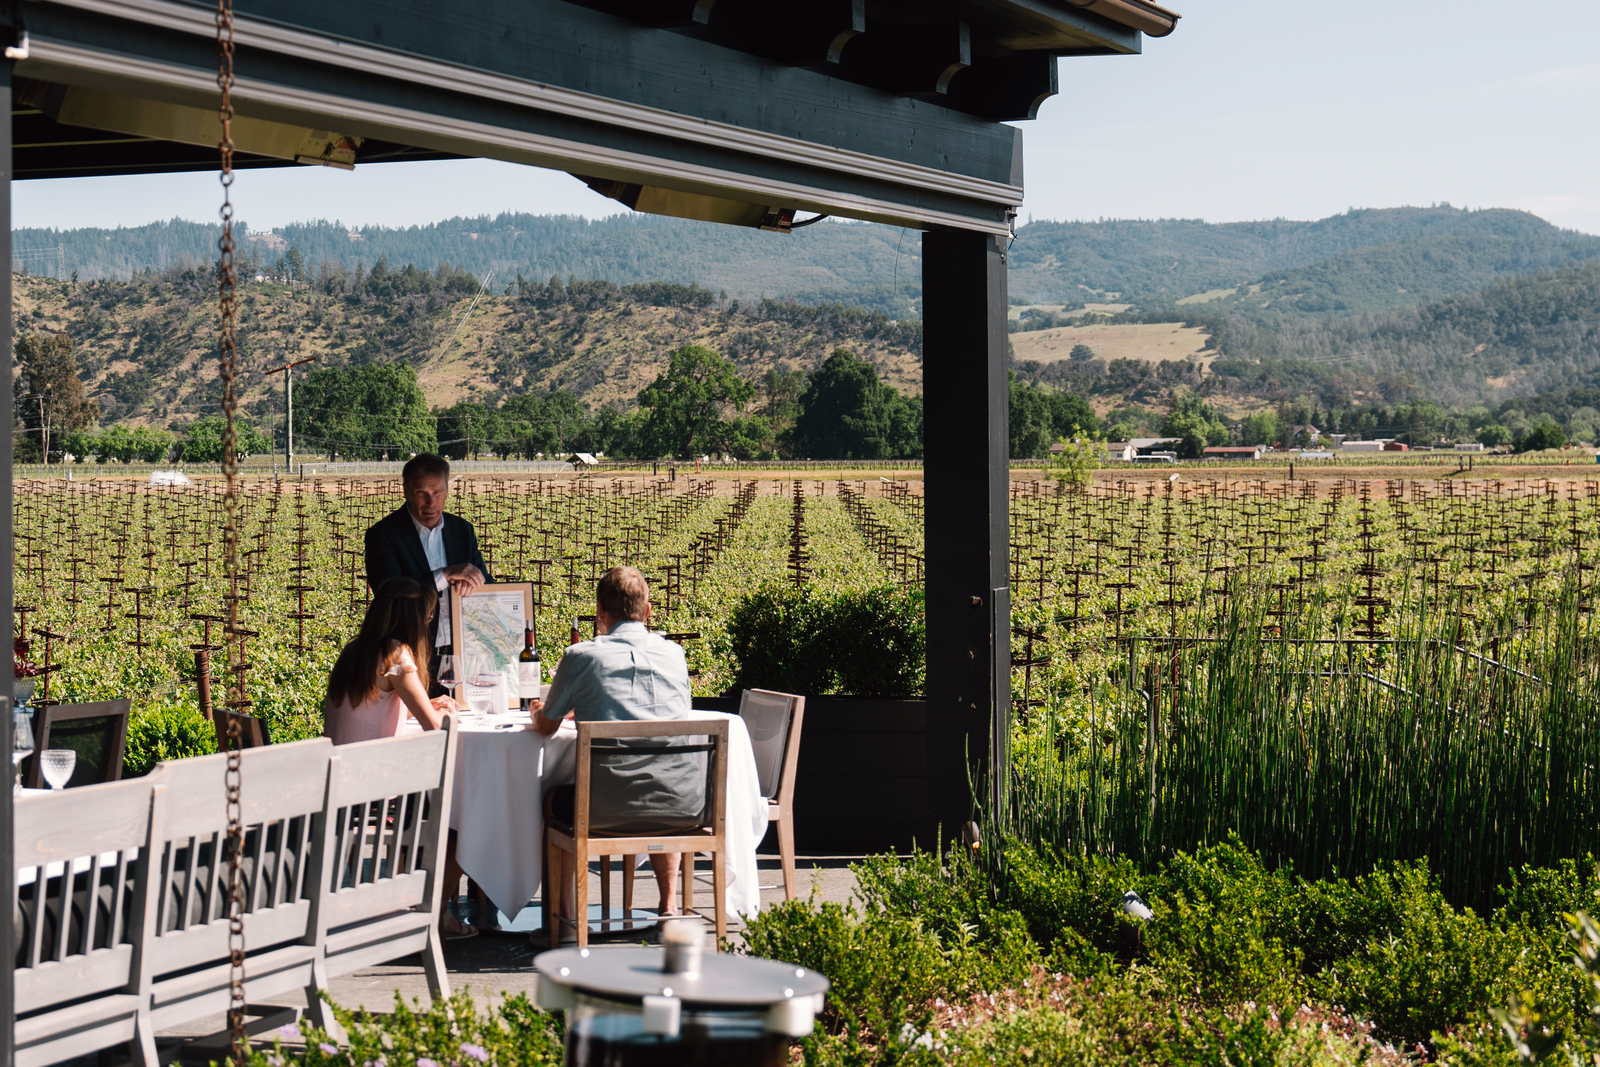 A couple enjoying a tasting at The Salon at Heitz Cellar outside overlooking the vineyard.